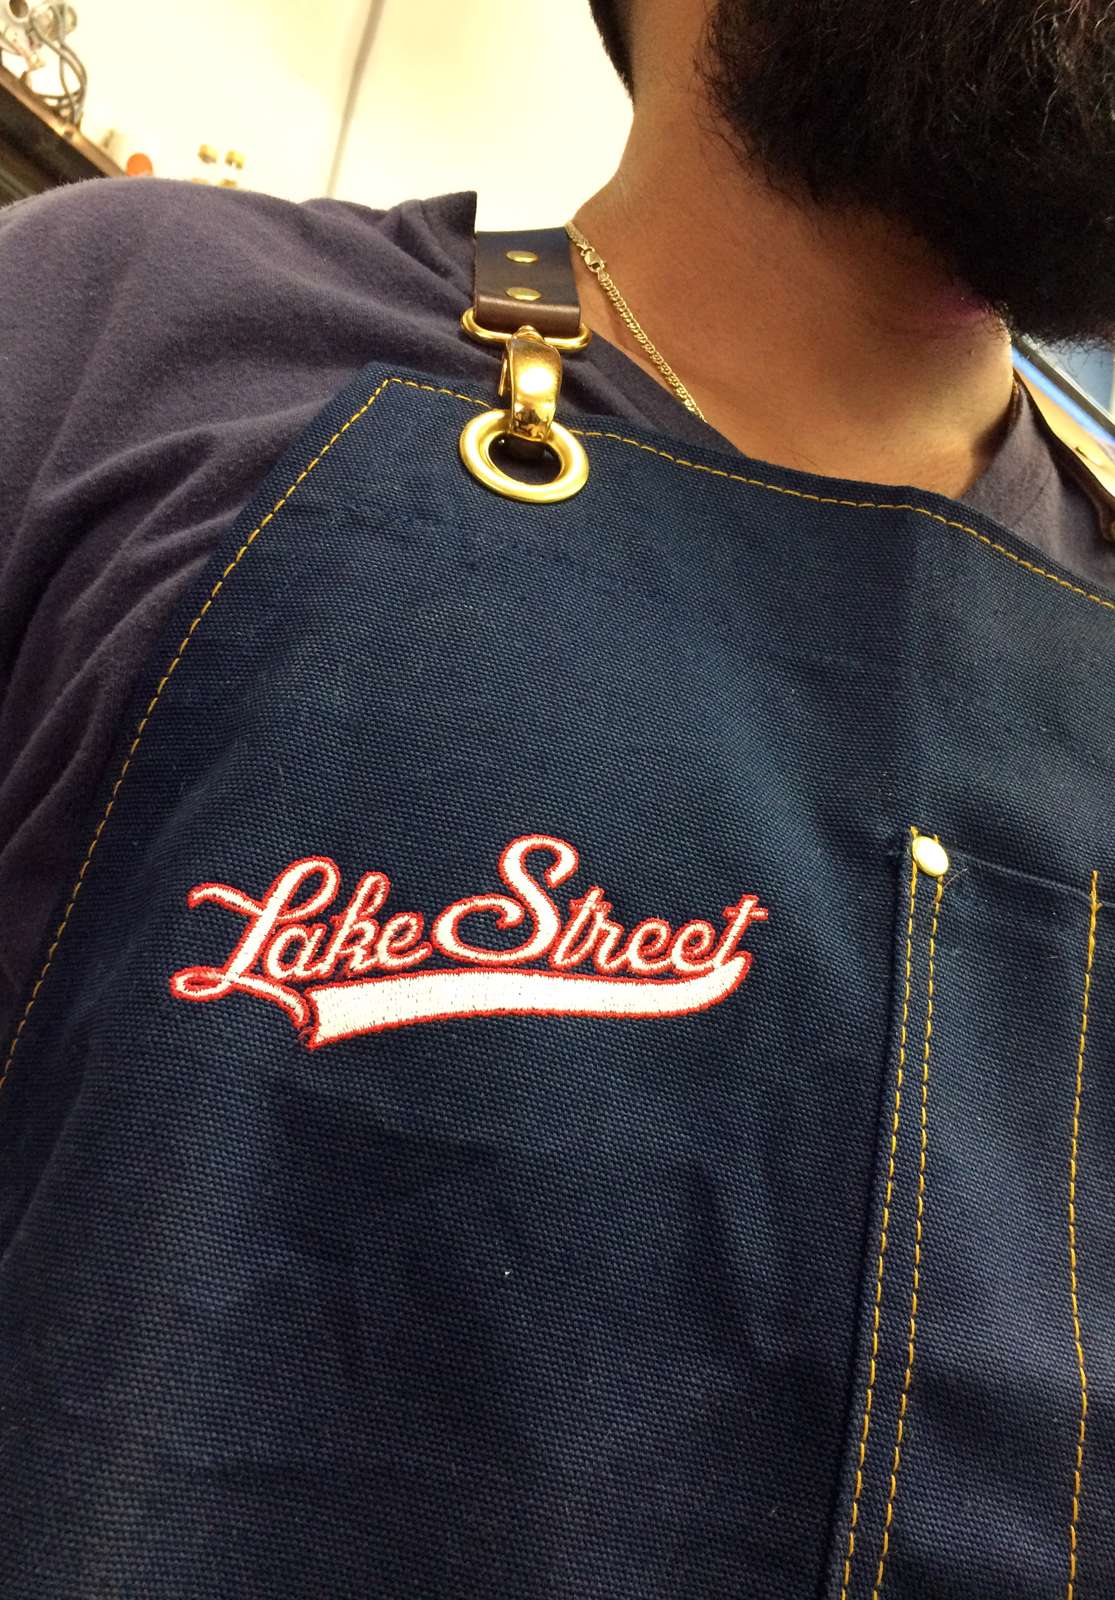 Logo design for Lake Street Barbers, executed on an apron